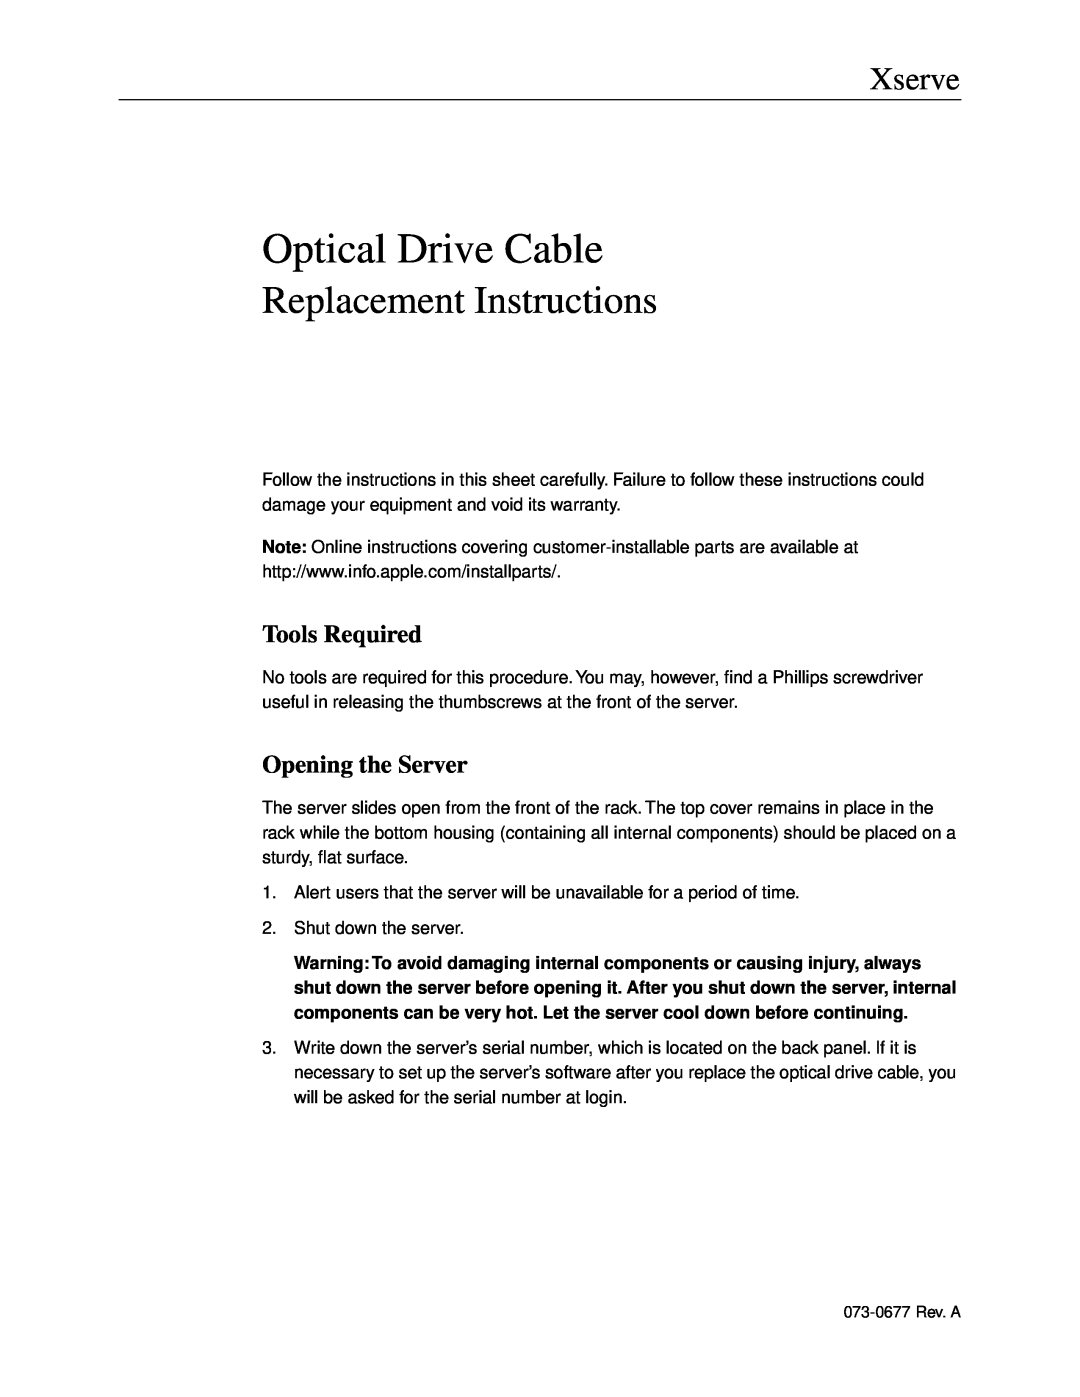 Apple Optical Drive Cable warranty Tools Required, Opening the Server, Replacement Instructions, Xserve 